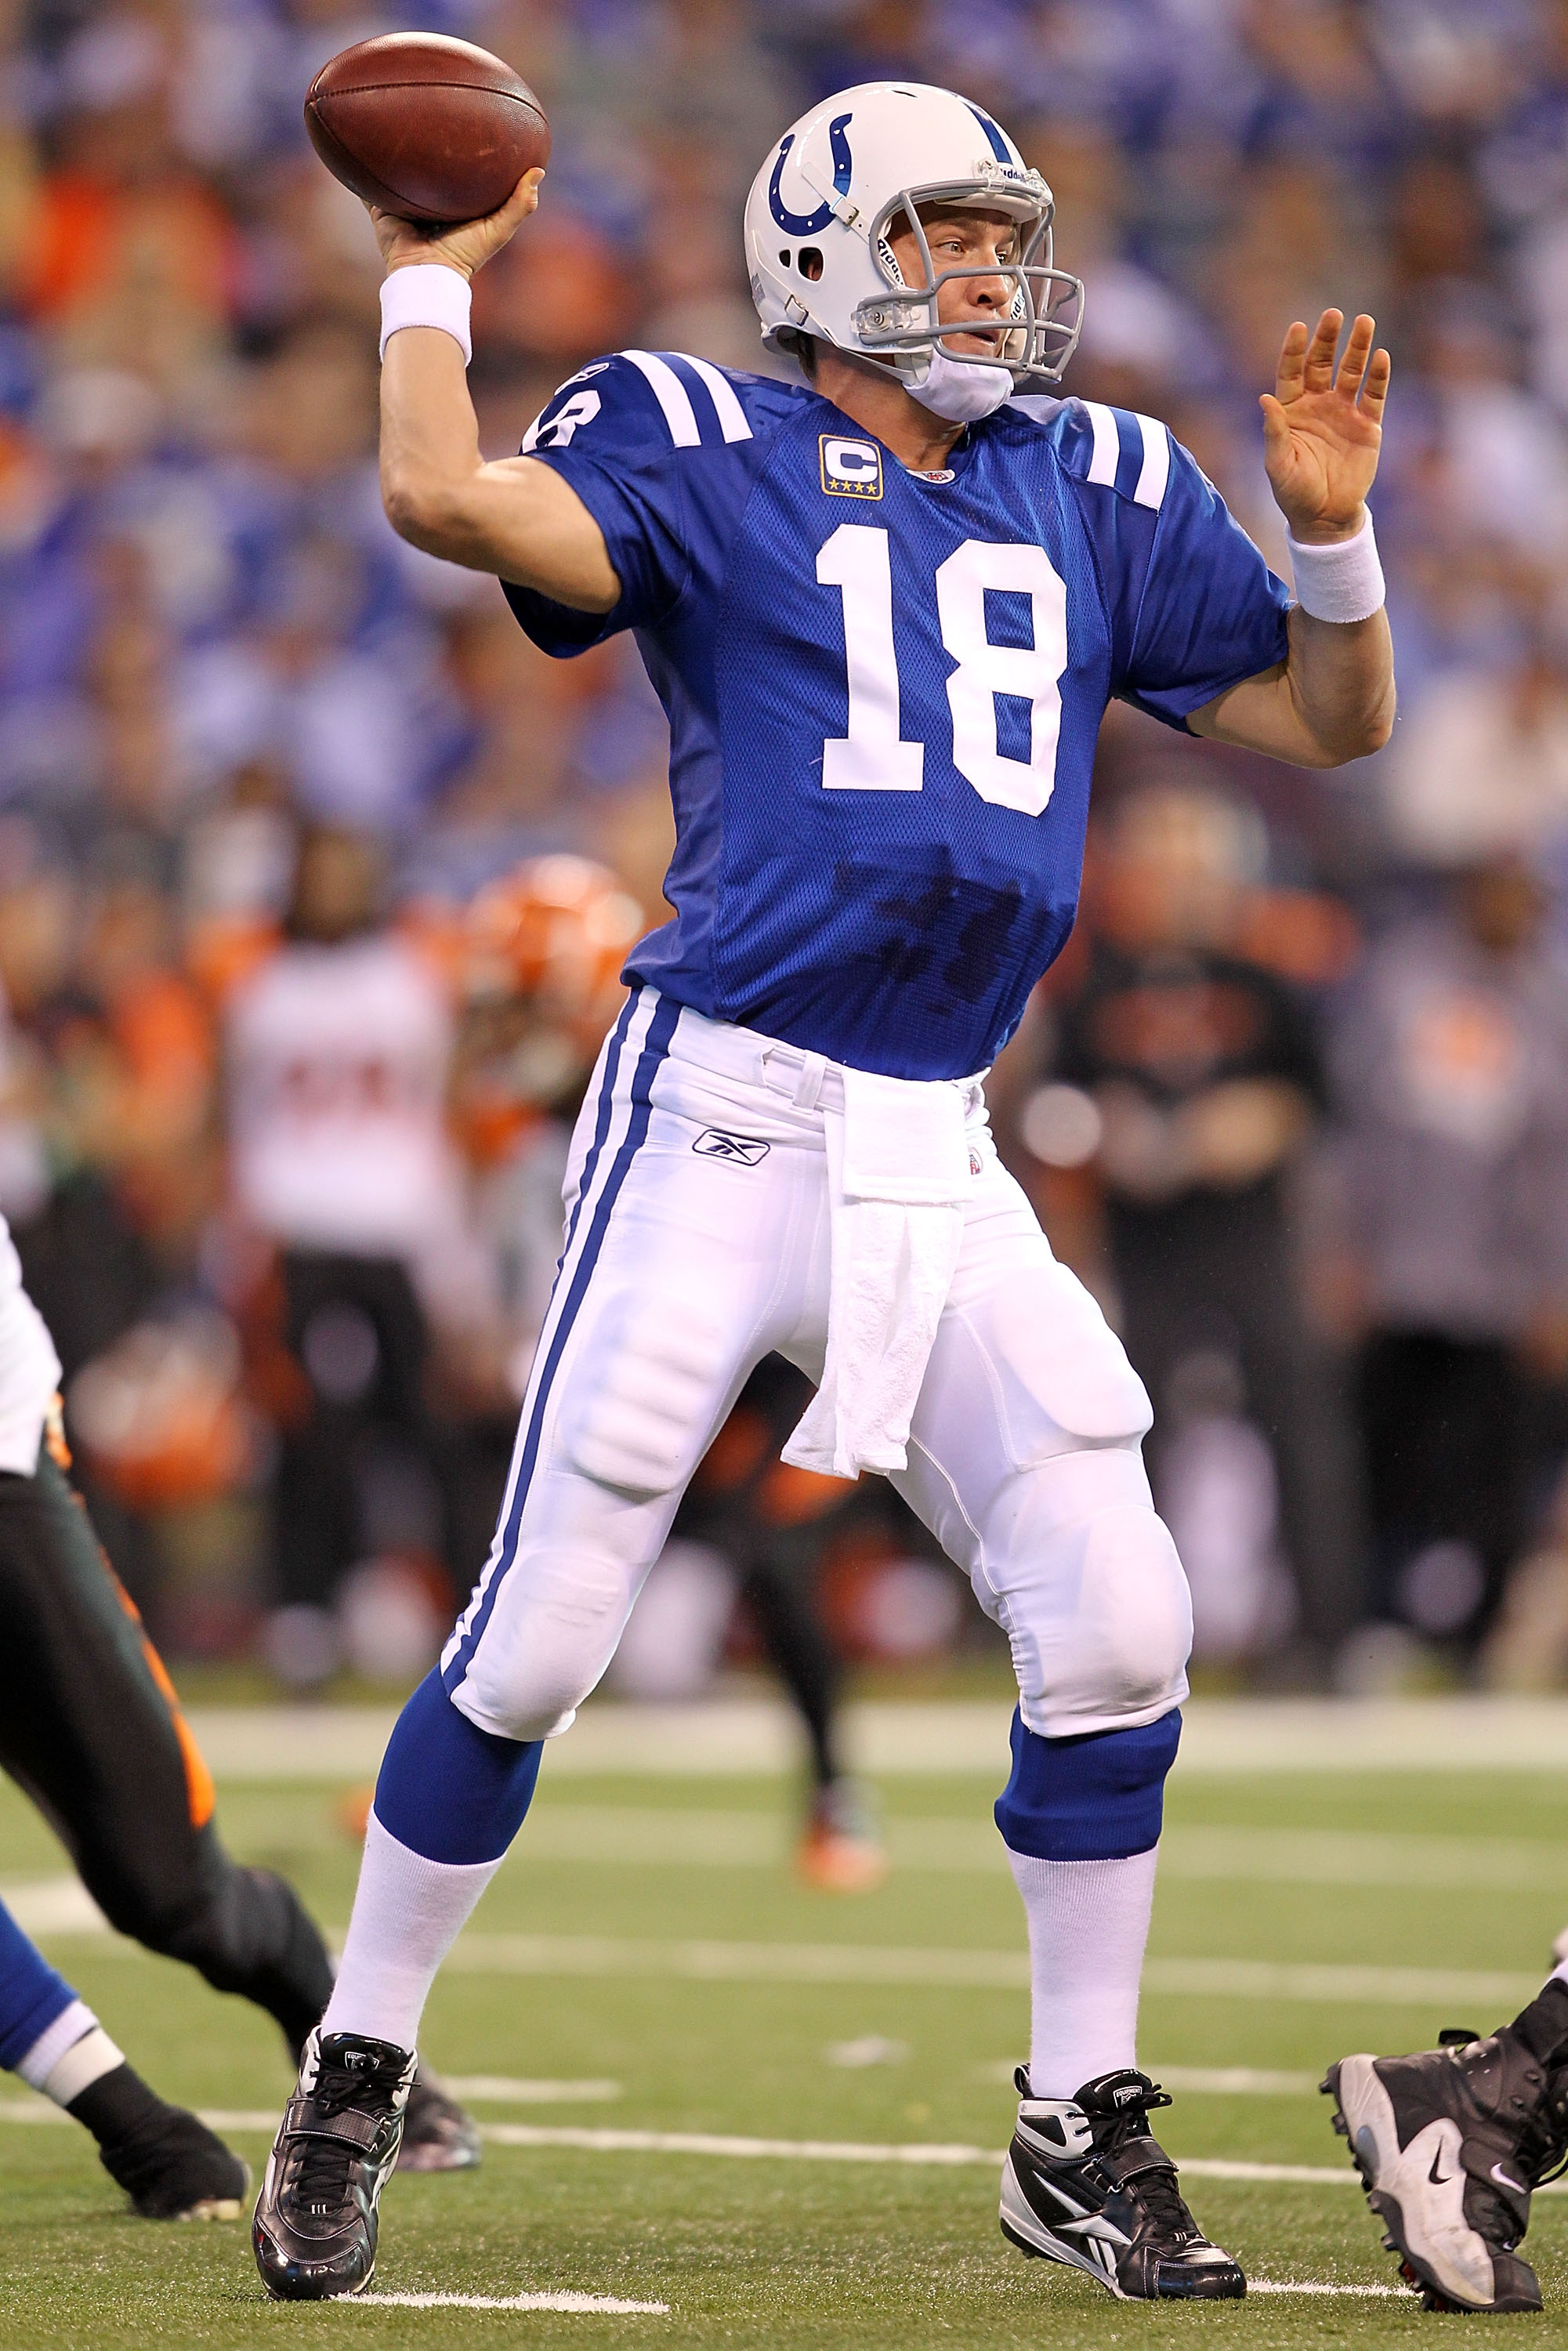 INDIANAPOLIS - NOVEMBER 14:  Peyton Manning #18 of the Indianapolis Colts throws a pass during the NFL game against the Cincinnati Bengals at Lucas Oil Stadium on November 14, 2010 in Indianapolis, Indiana. The Colts won 23-17.  (Photo by Andy Lyons/Getty